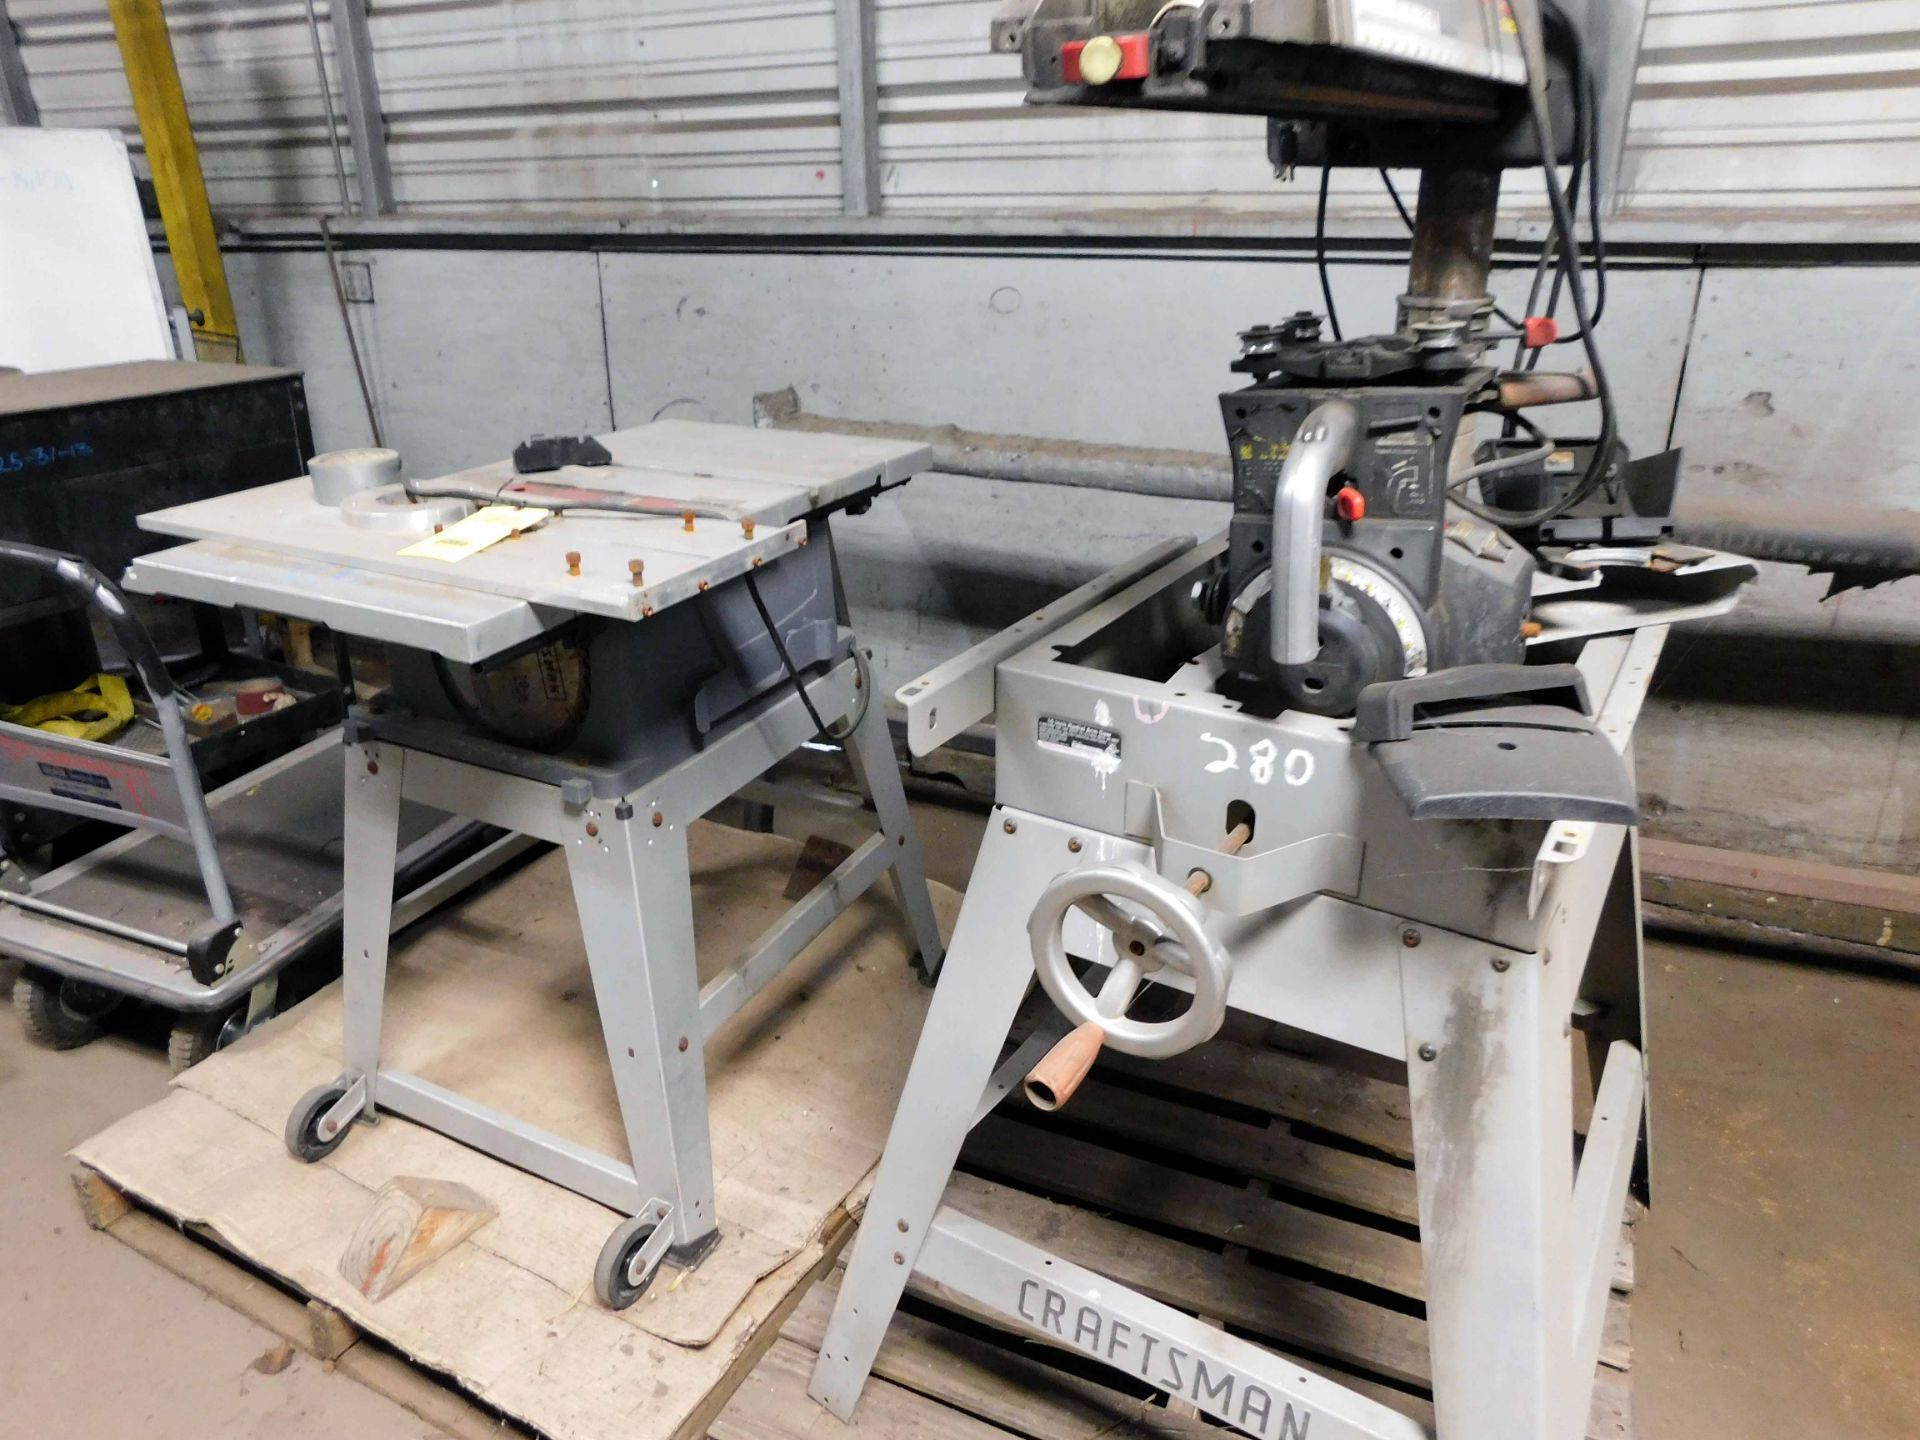 LOT CONSISTING OF: Craftsman 10" table saw, radial arm saw (repariable), propane heater, (2) shop